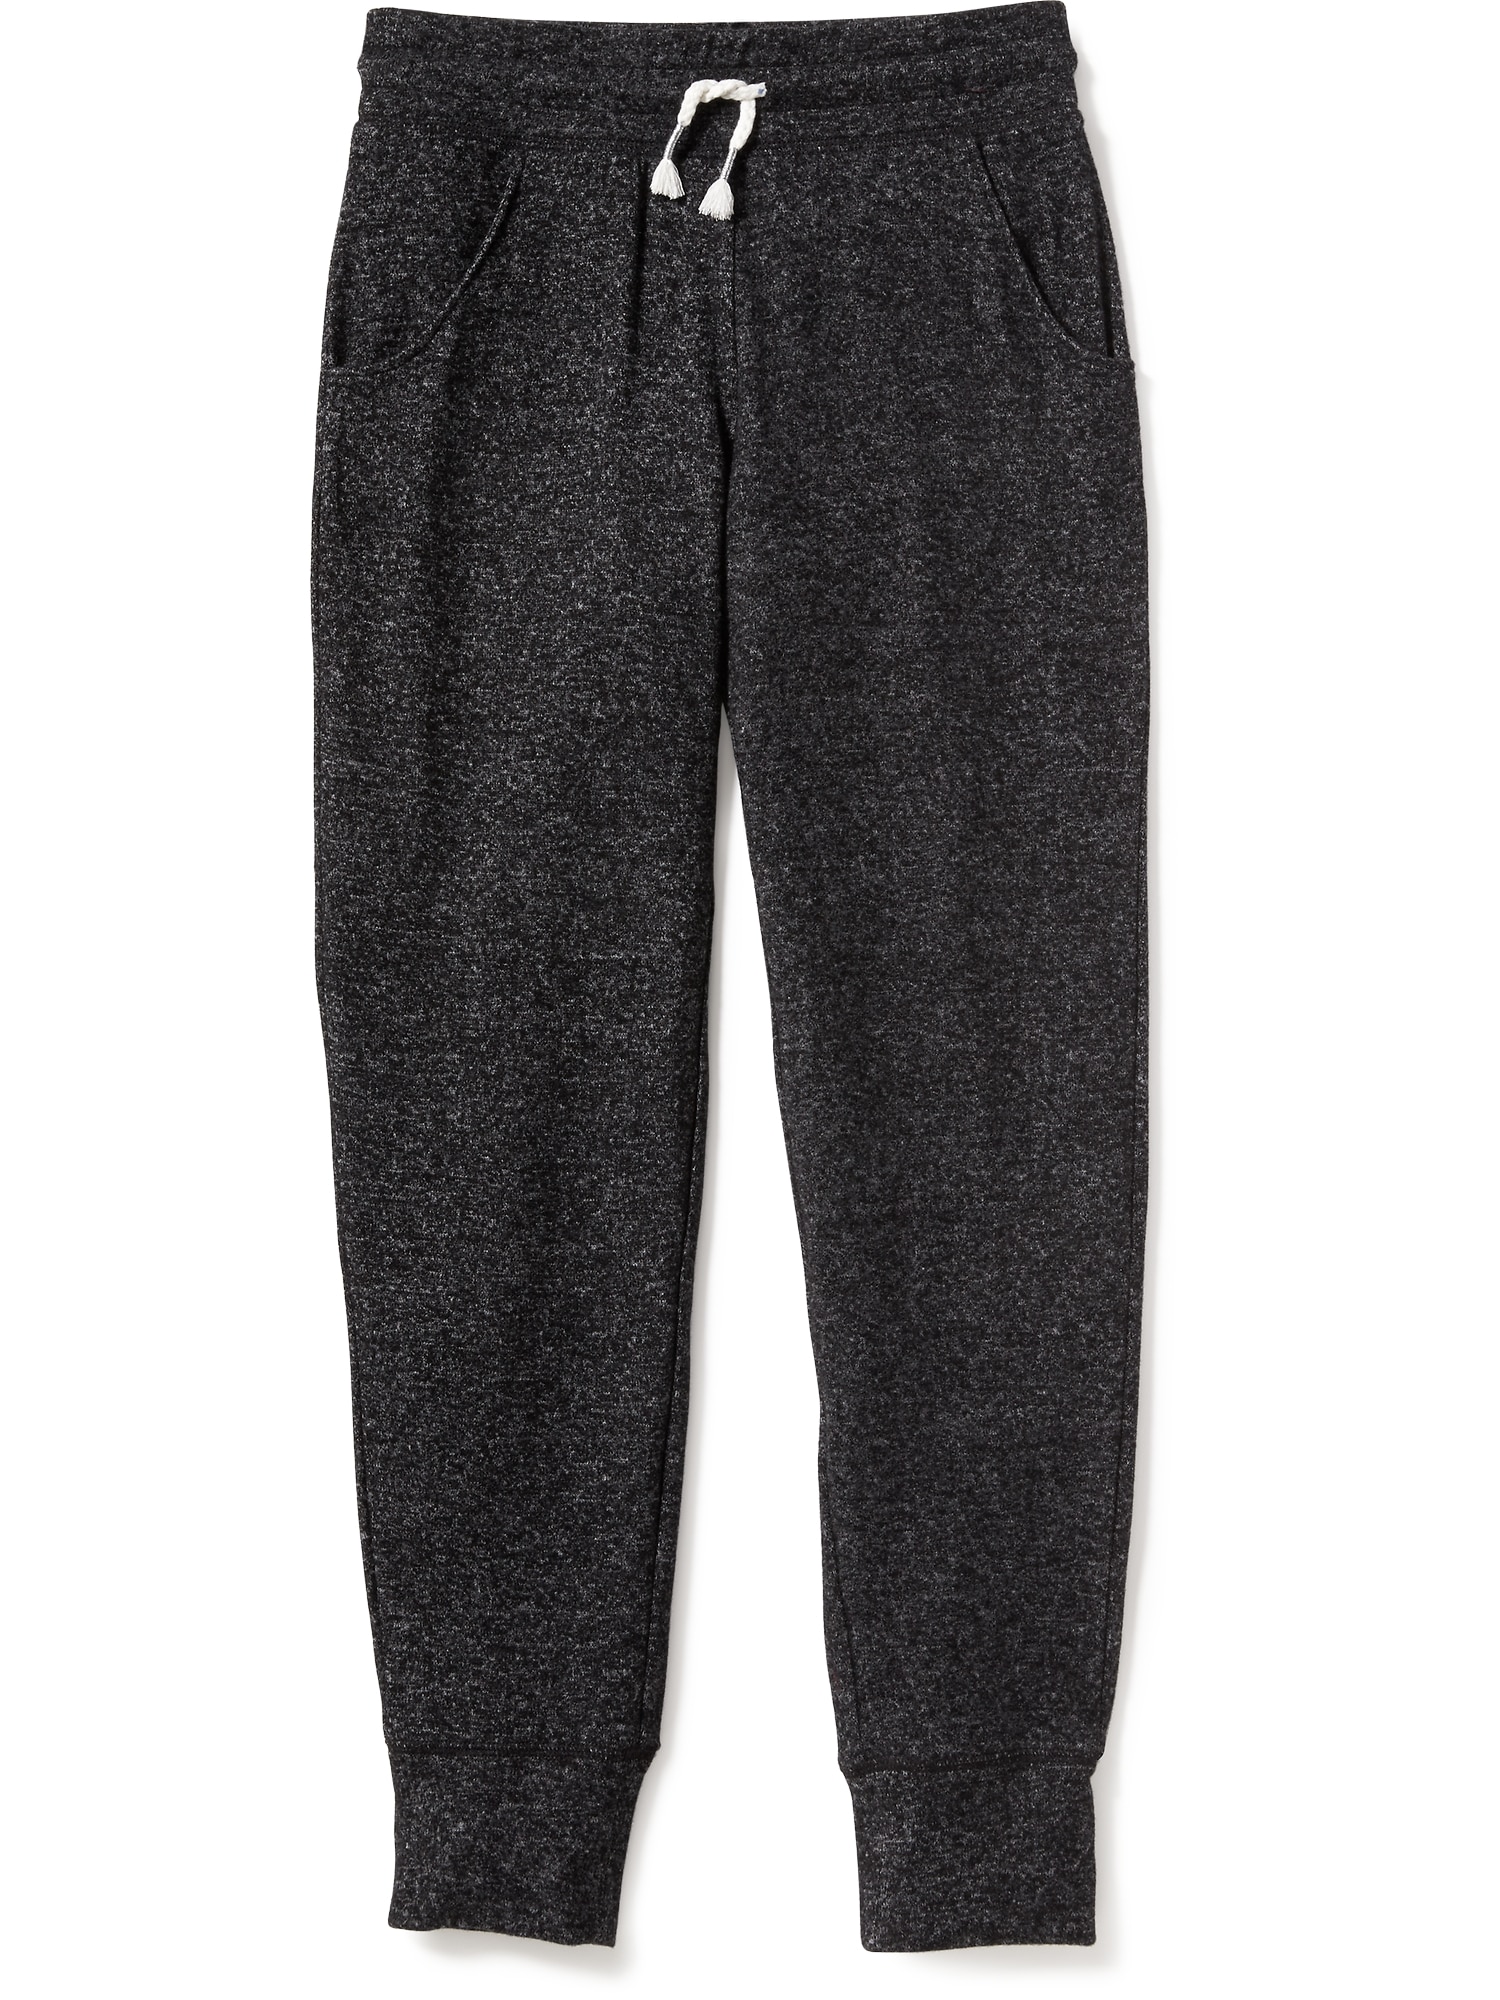 Xersion Soft Brushed Little & Big Girls Cuffed Jogger Pant, Color